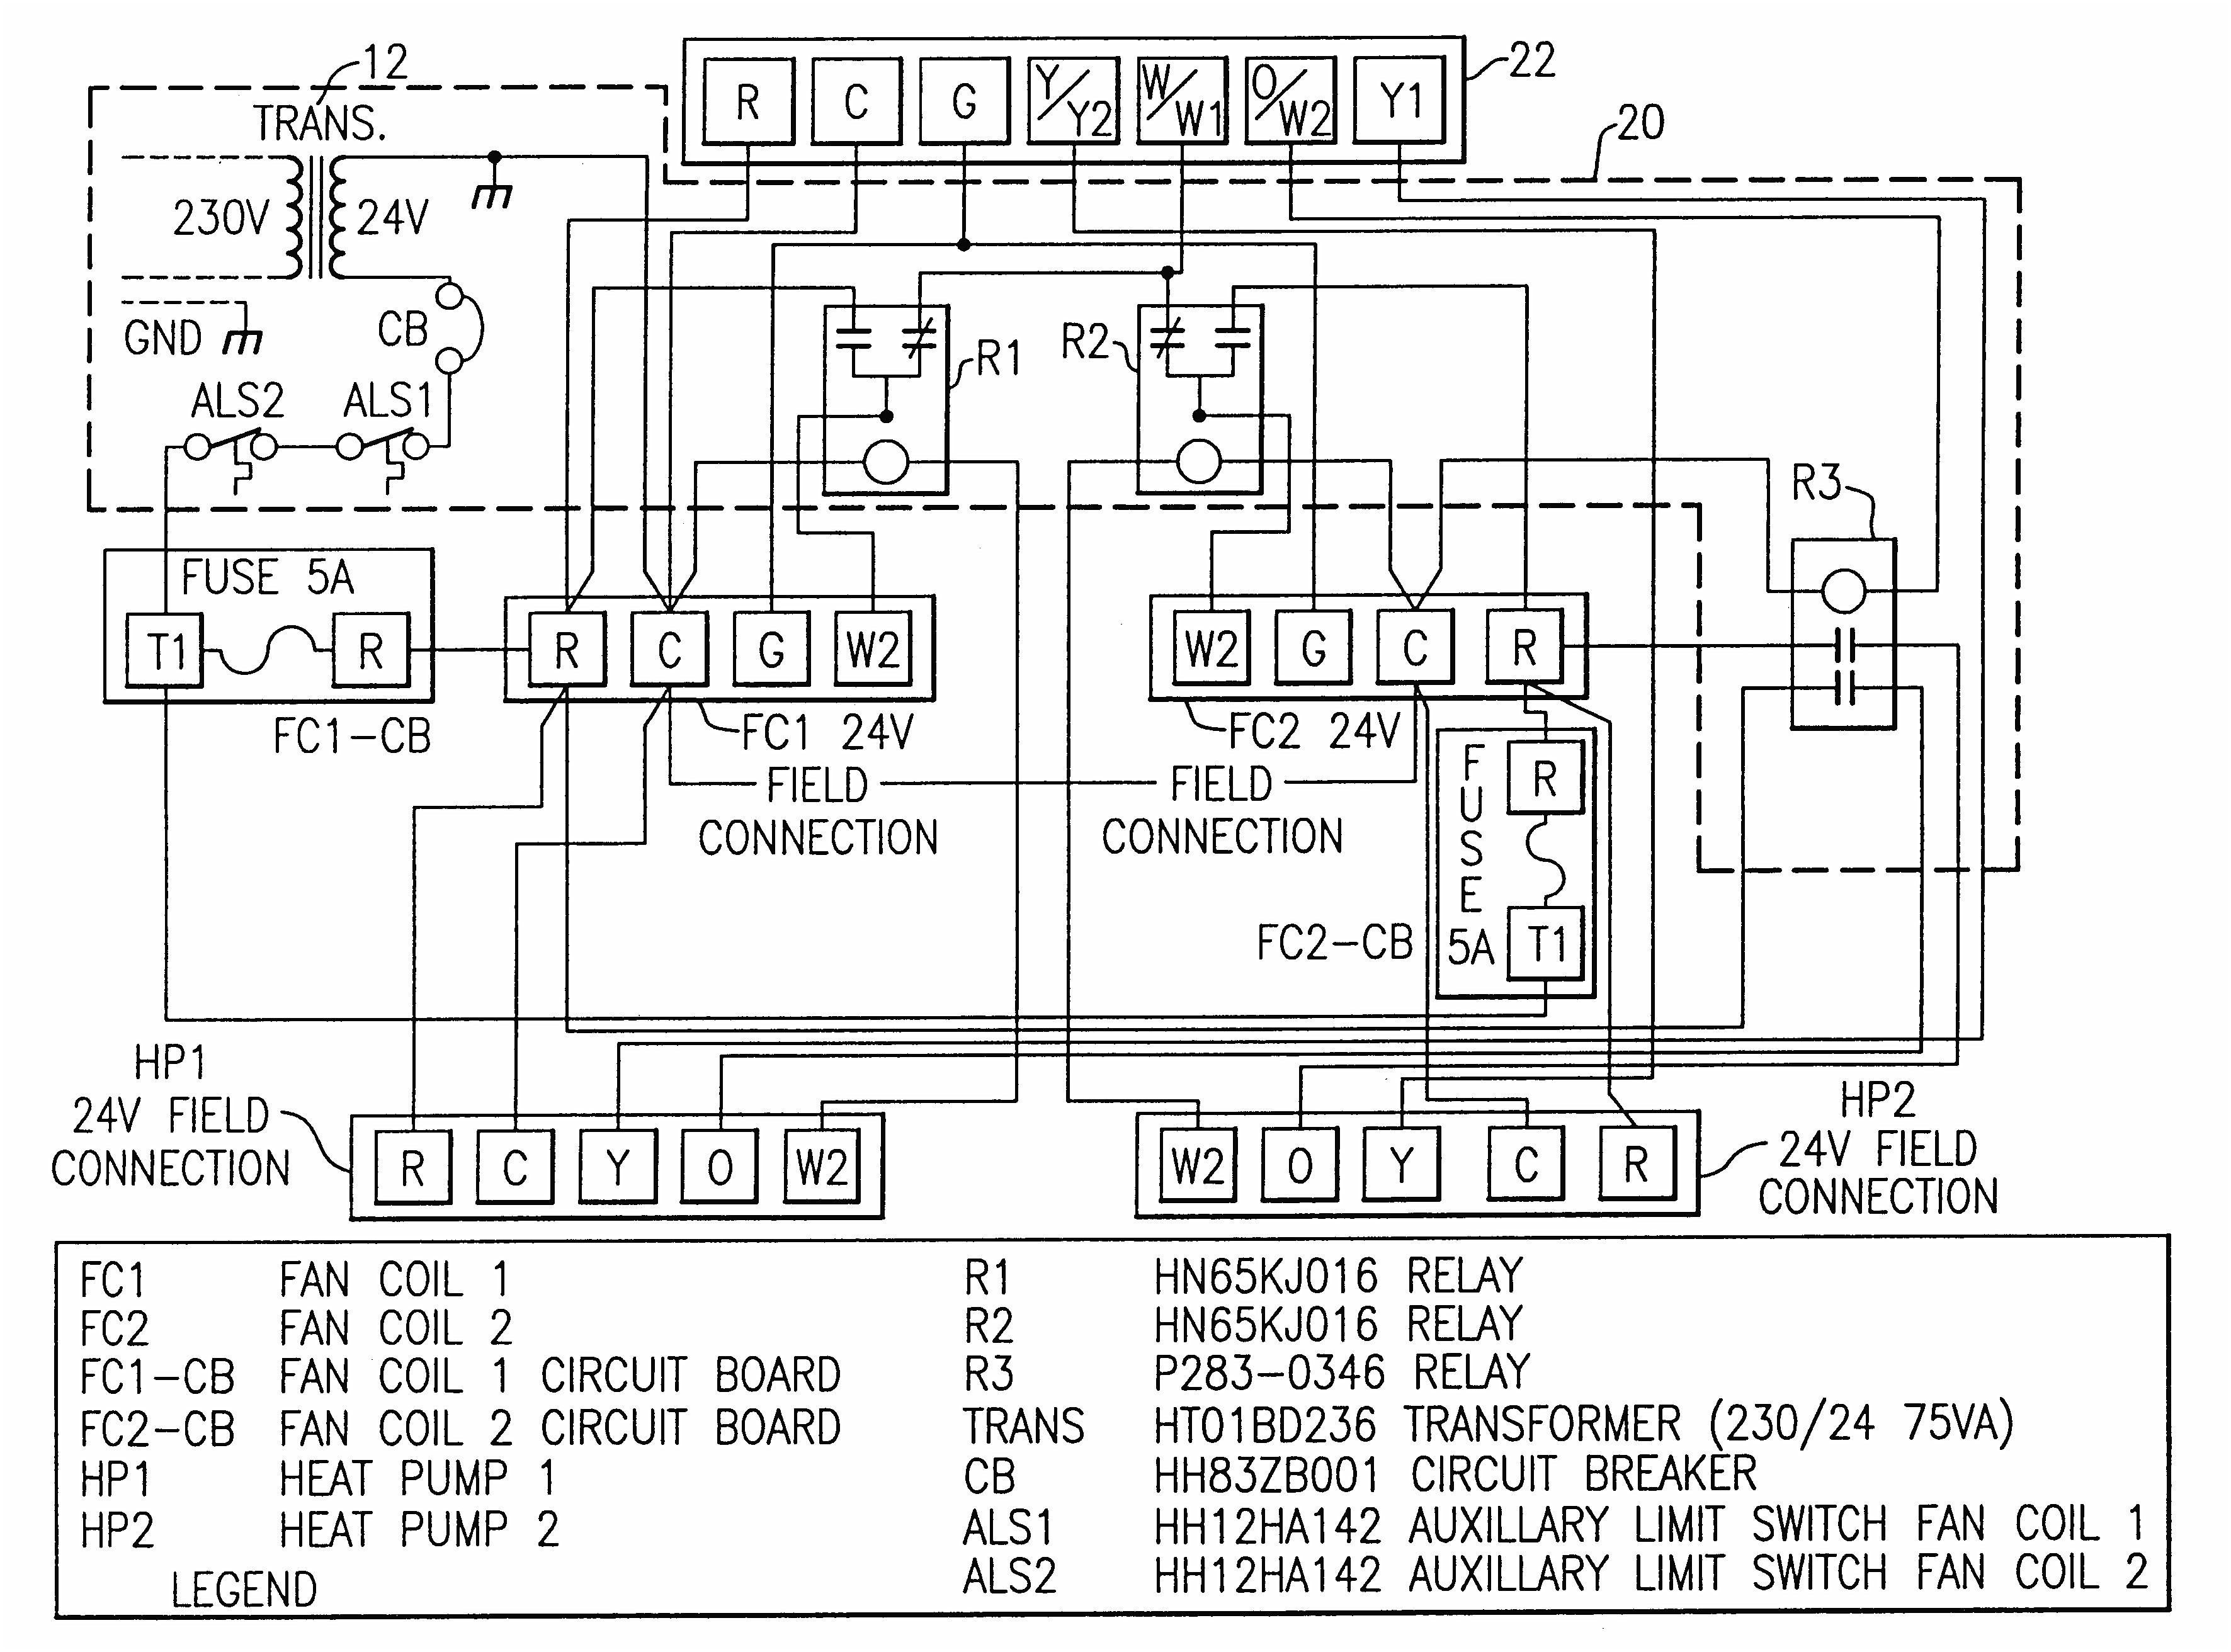 Carrier Infinity Thermostat Wiring Diagram from www.adinaporter.com